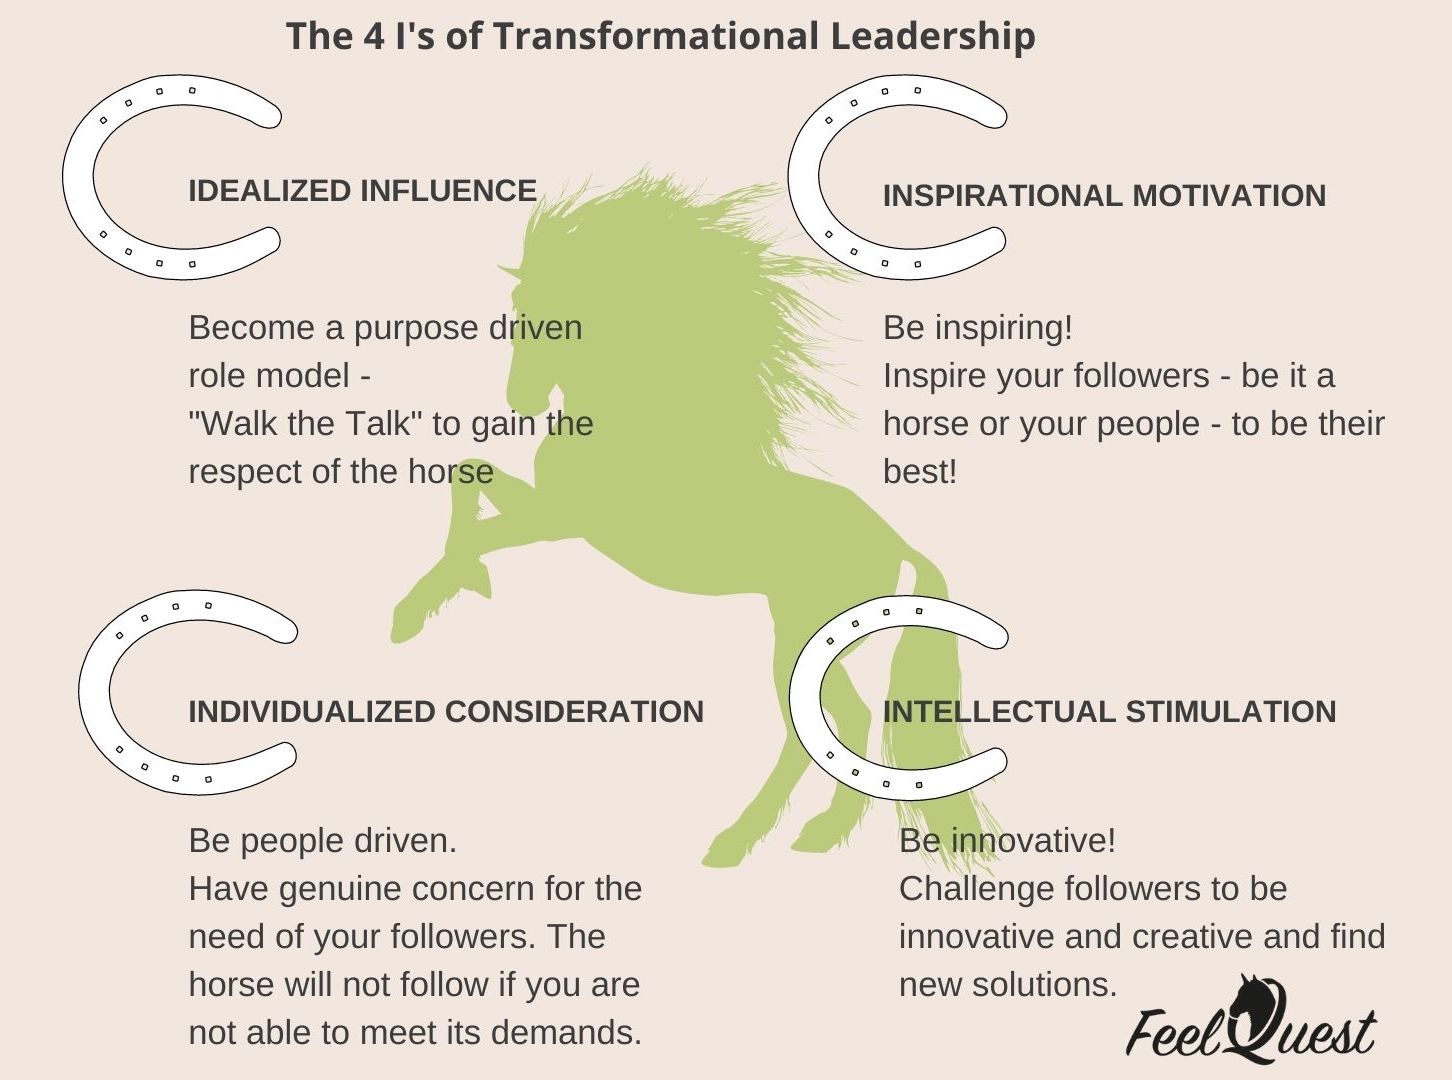 Practical, straight to the point, and actually leading instead of just talking about leadership... find out how to apply transformational leadership